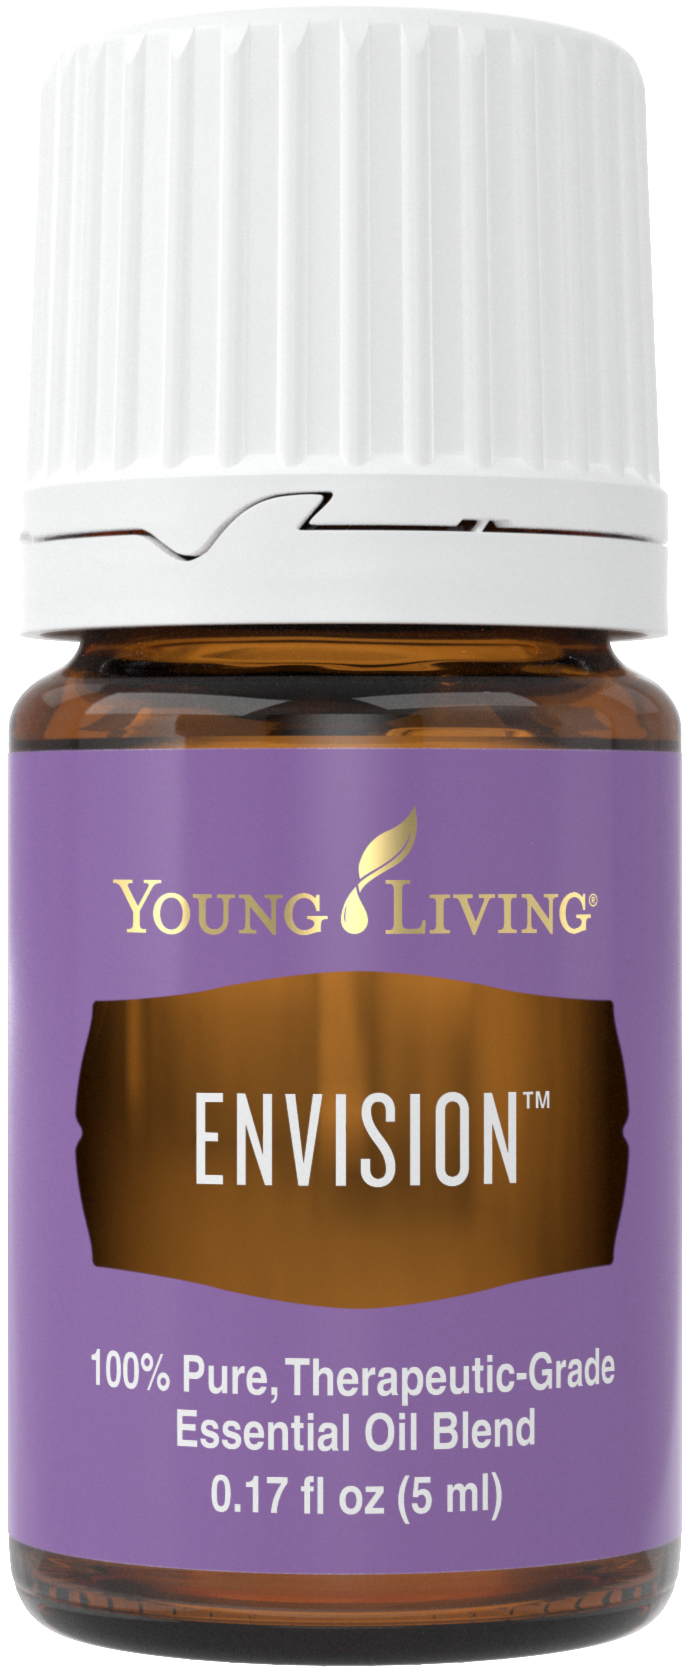 Envision 5ml Silo.png